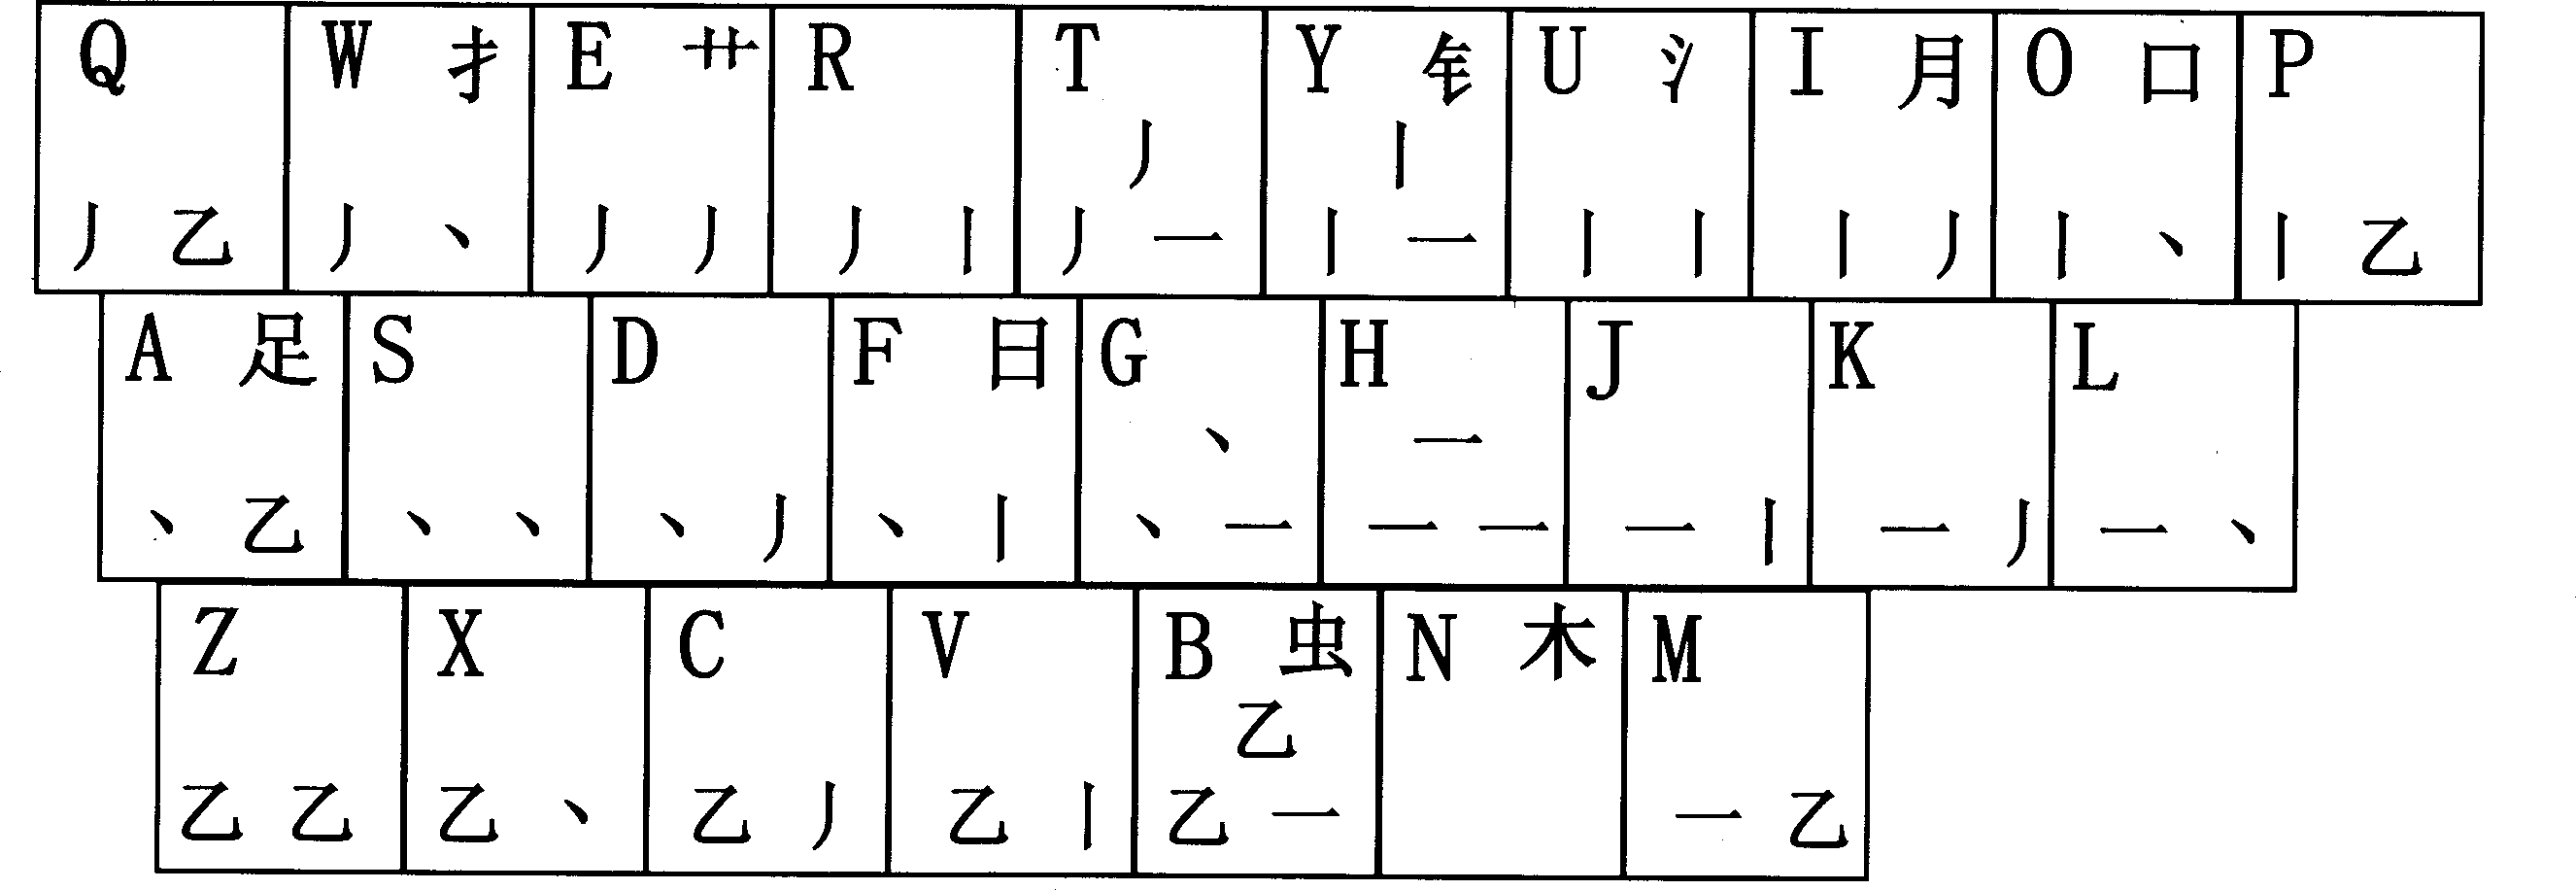 Intelligent shape-phonetic-digital multicode combined Chinese character input system